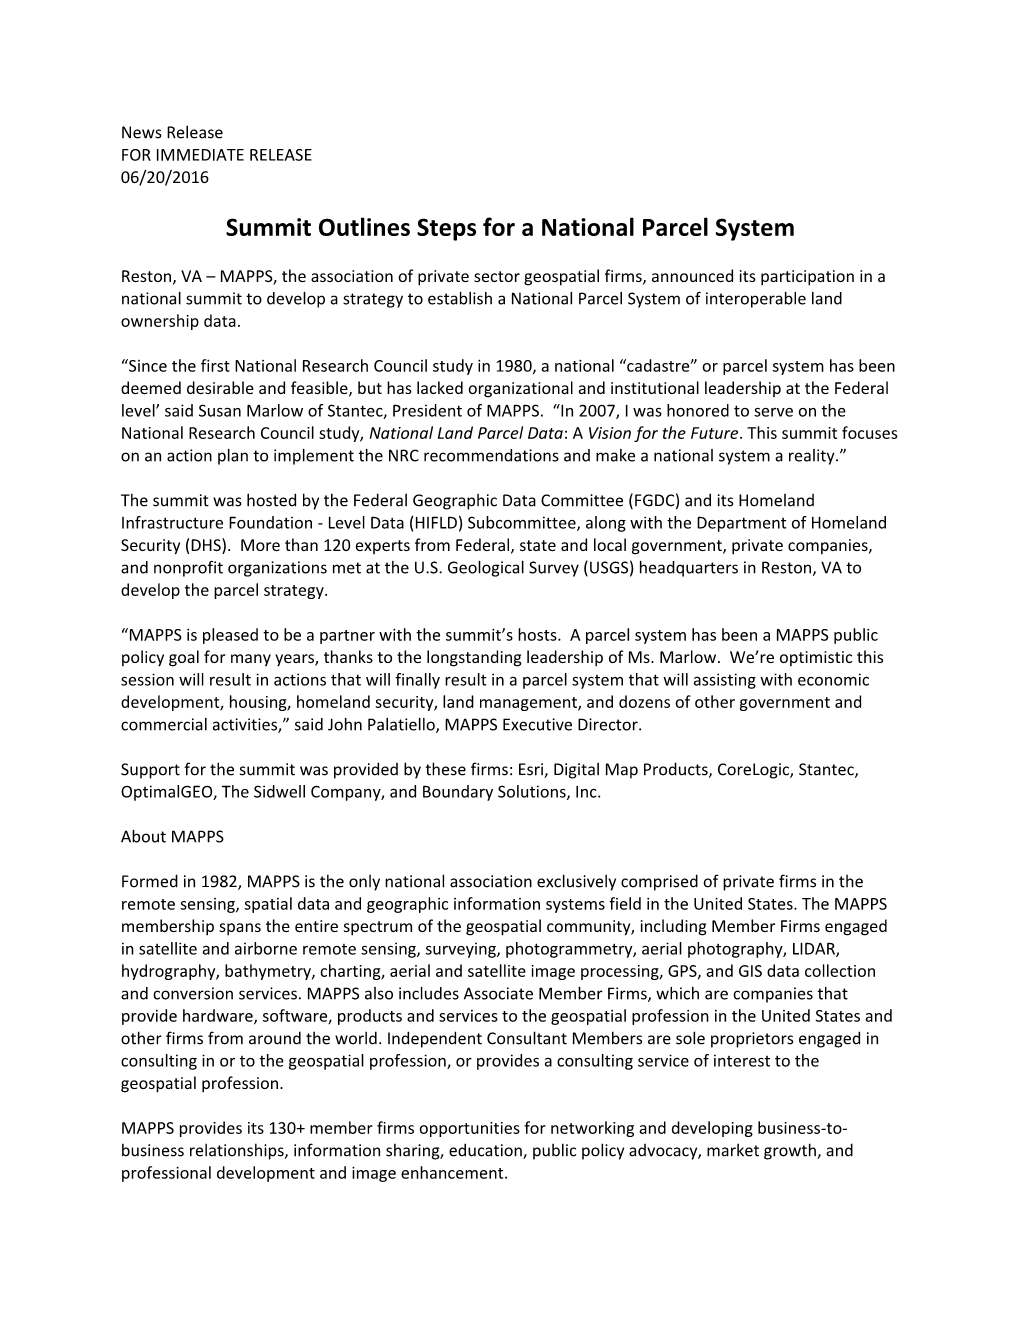 Summit Outlines Steps for a National Parcel System